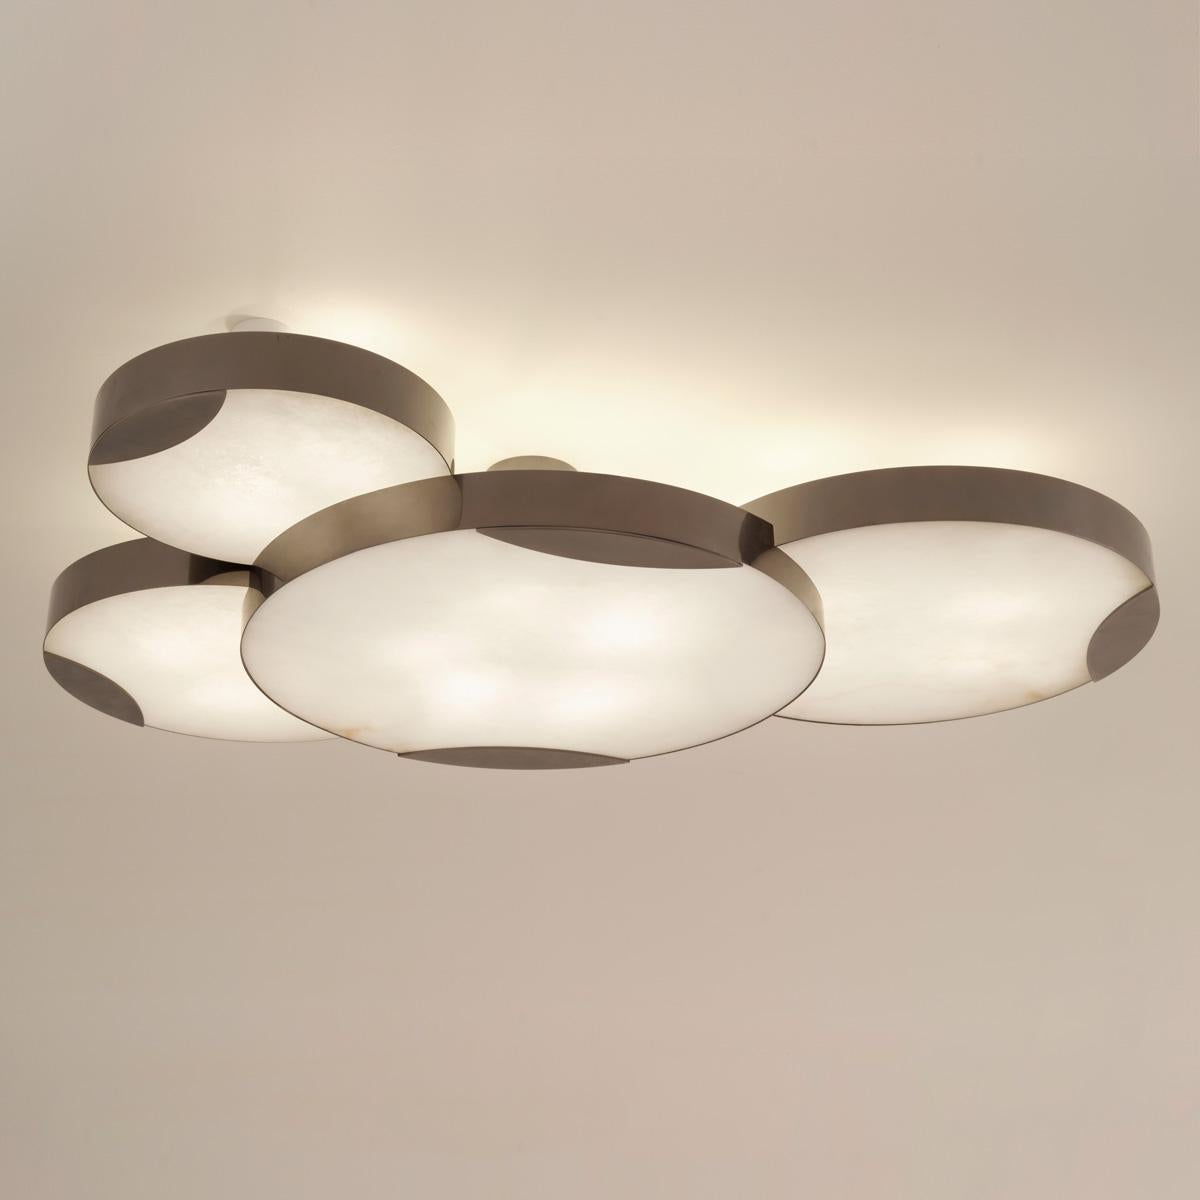 Cloud N.4 Ceiling Light by Gaspare Asaro-Bronze Finish For Sale 2